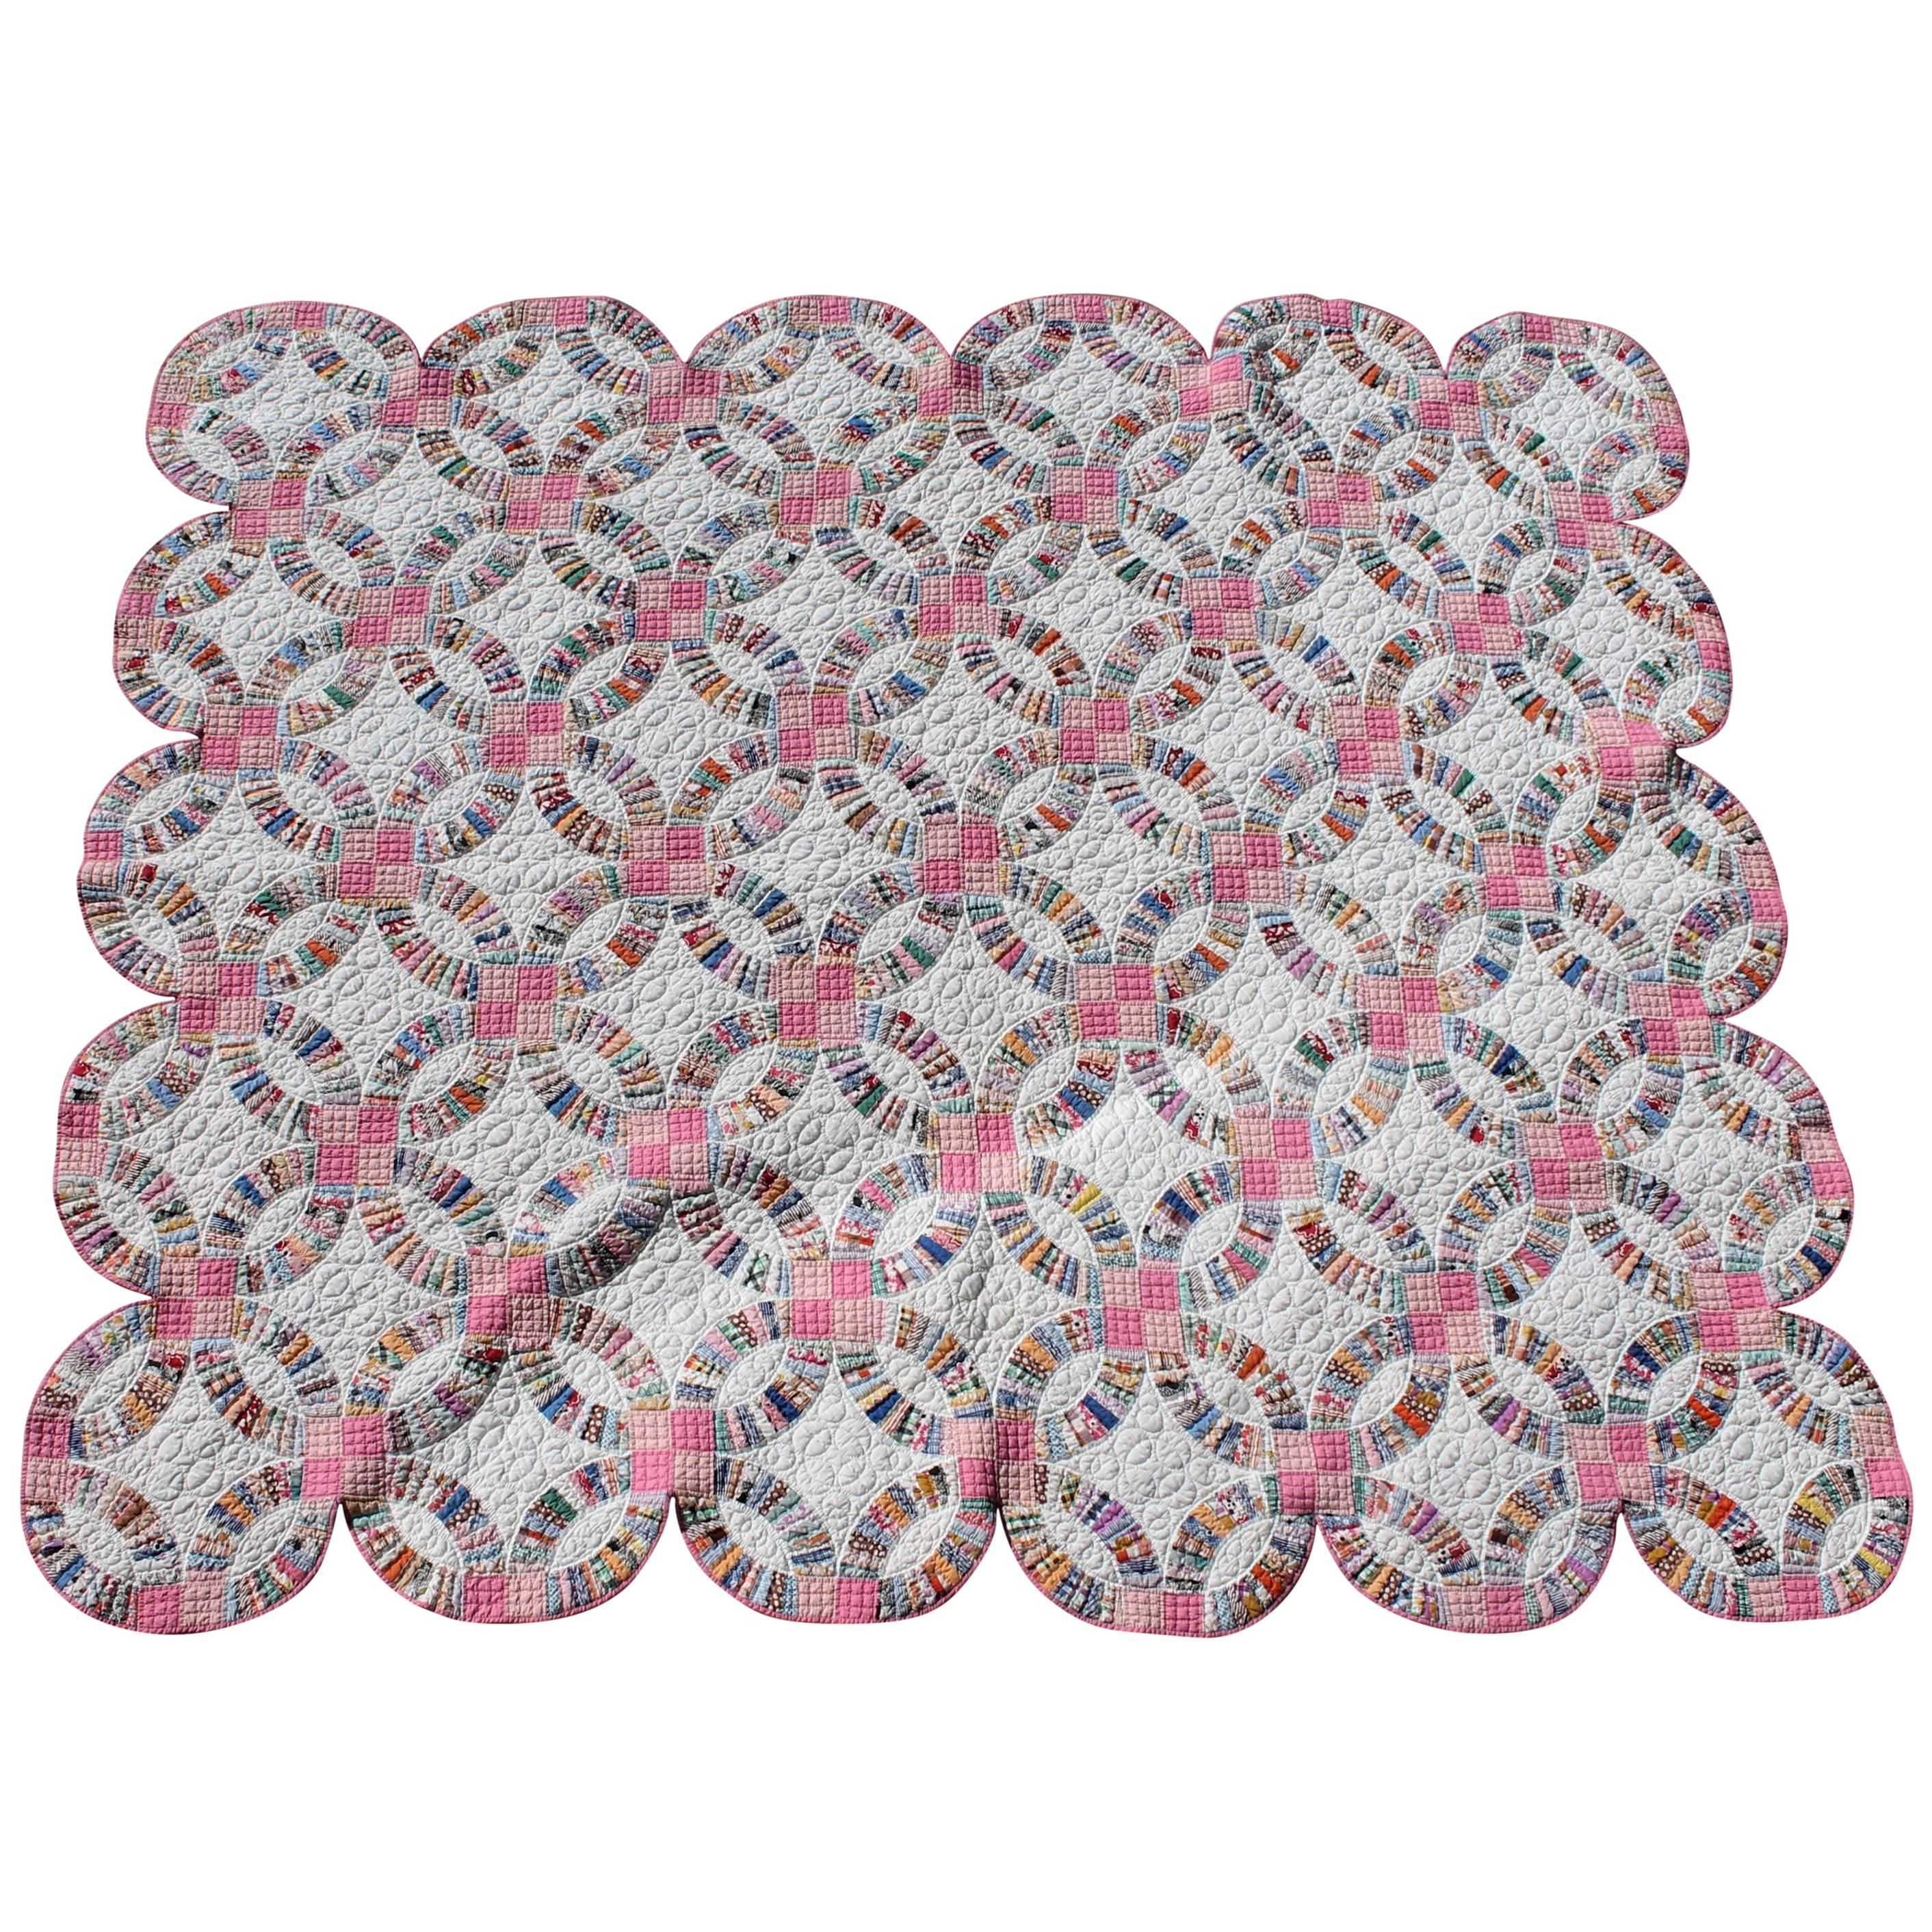 Double Wedding Ring Quilt with Scalloped Border